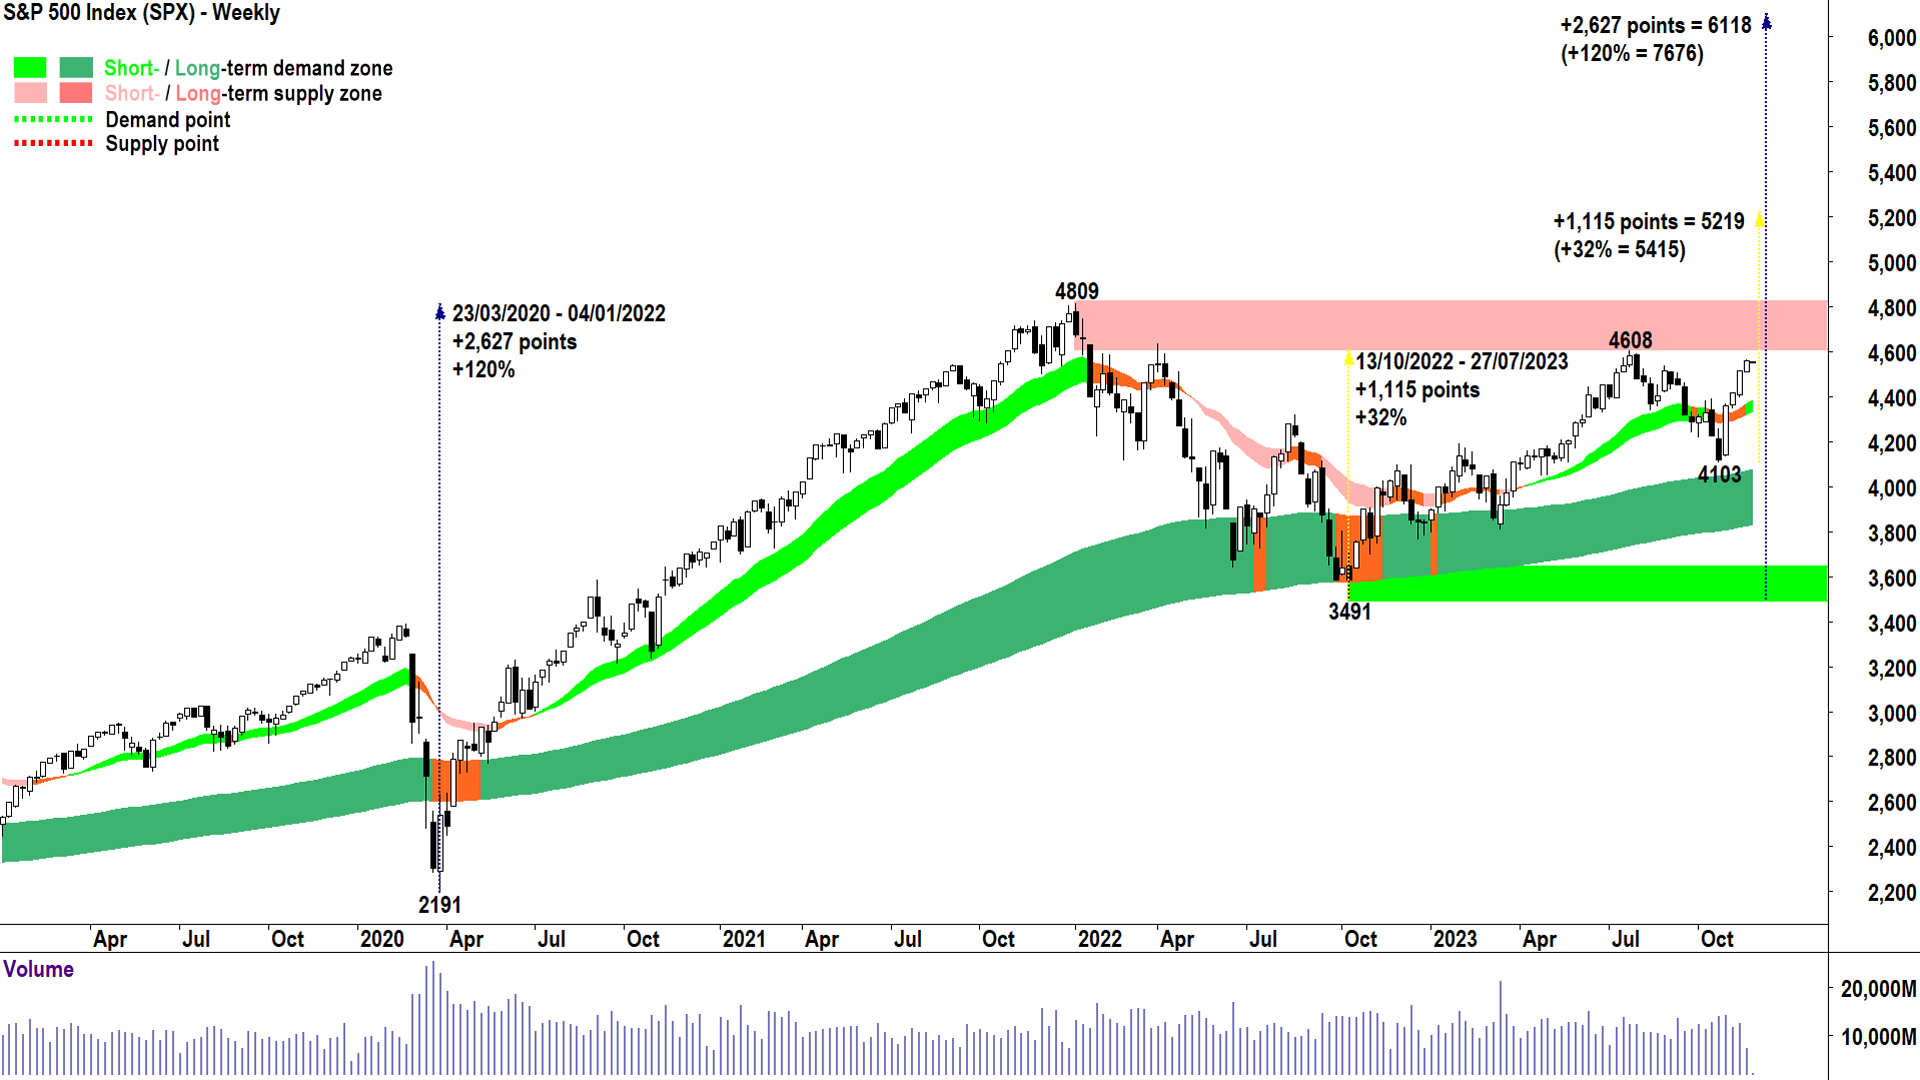 S&P500 measured move - 2024 target and beyond